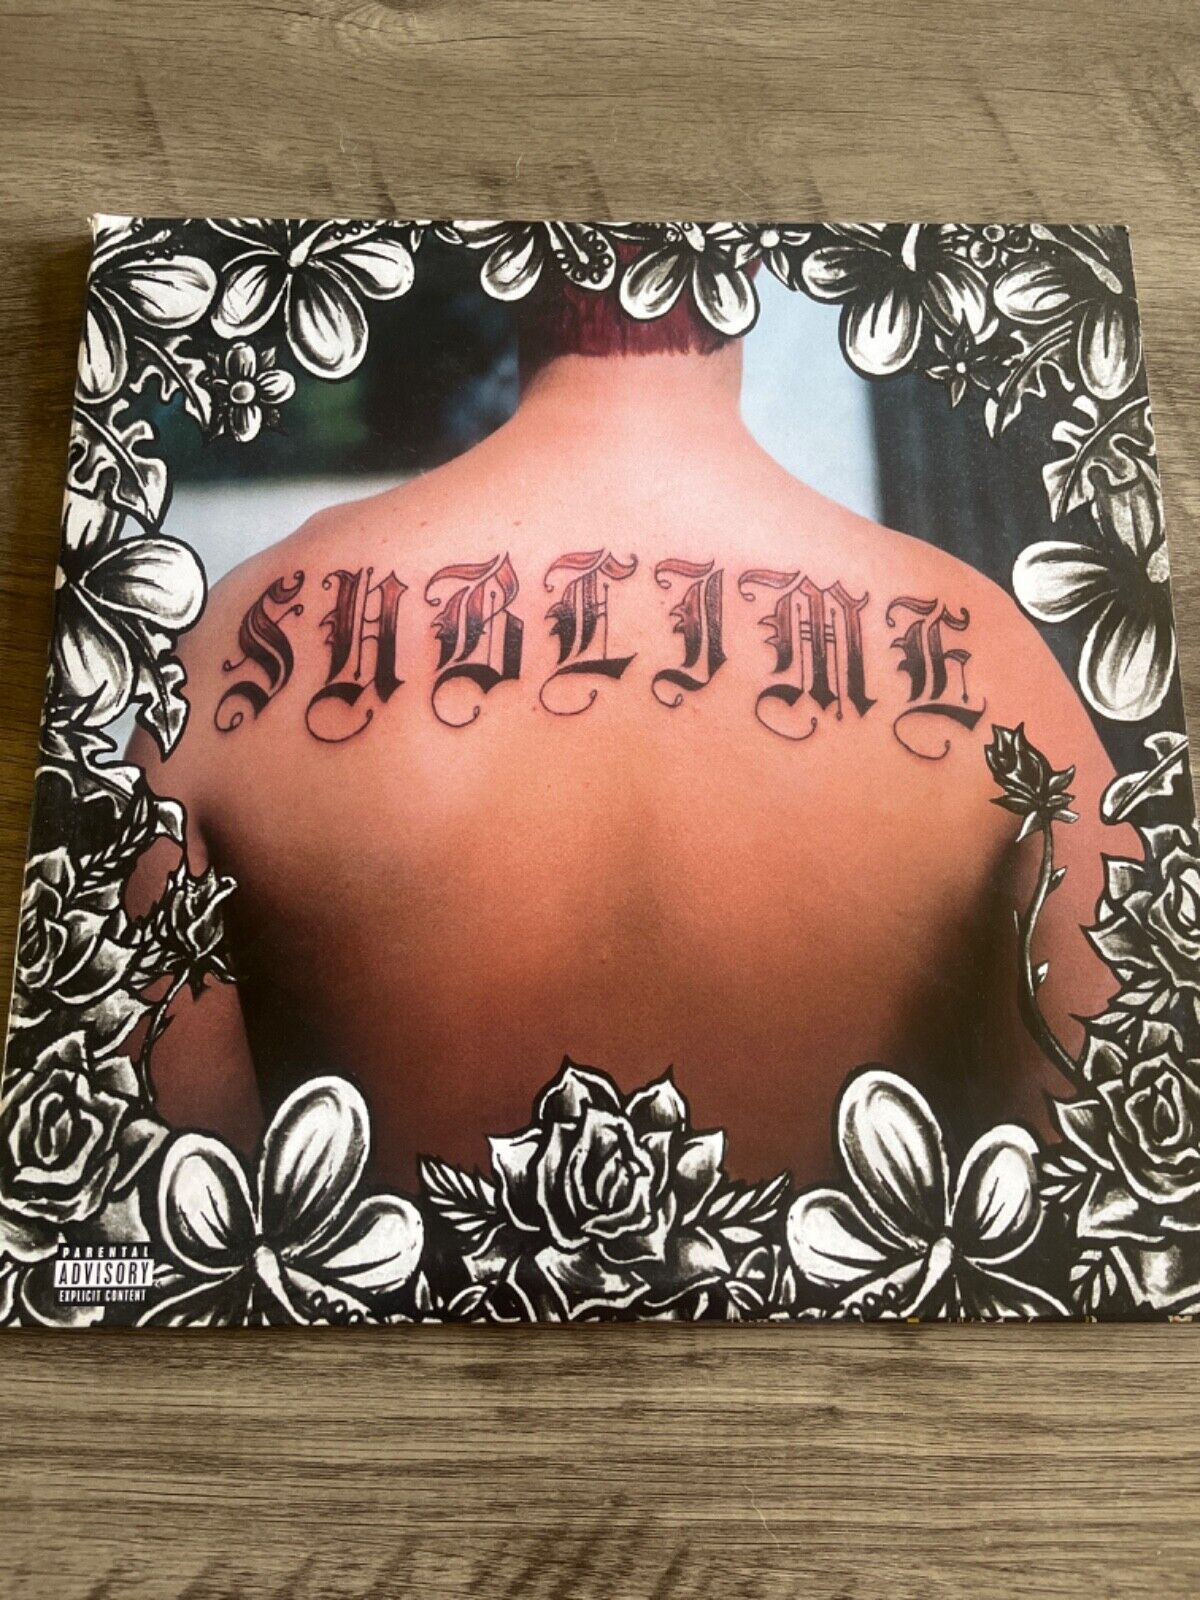 Sublime by Sublime (Record, 2016)